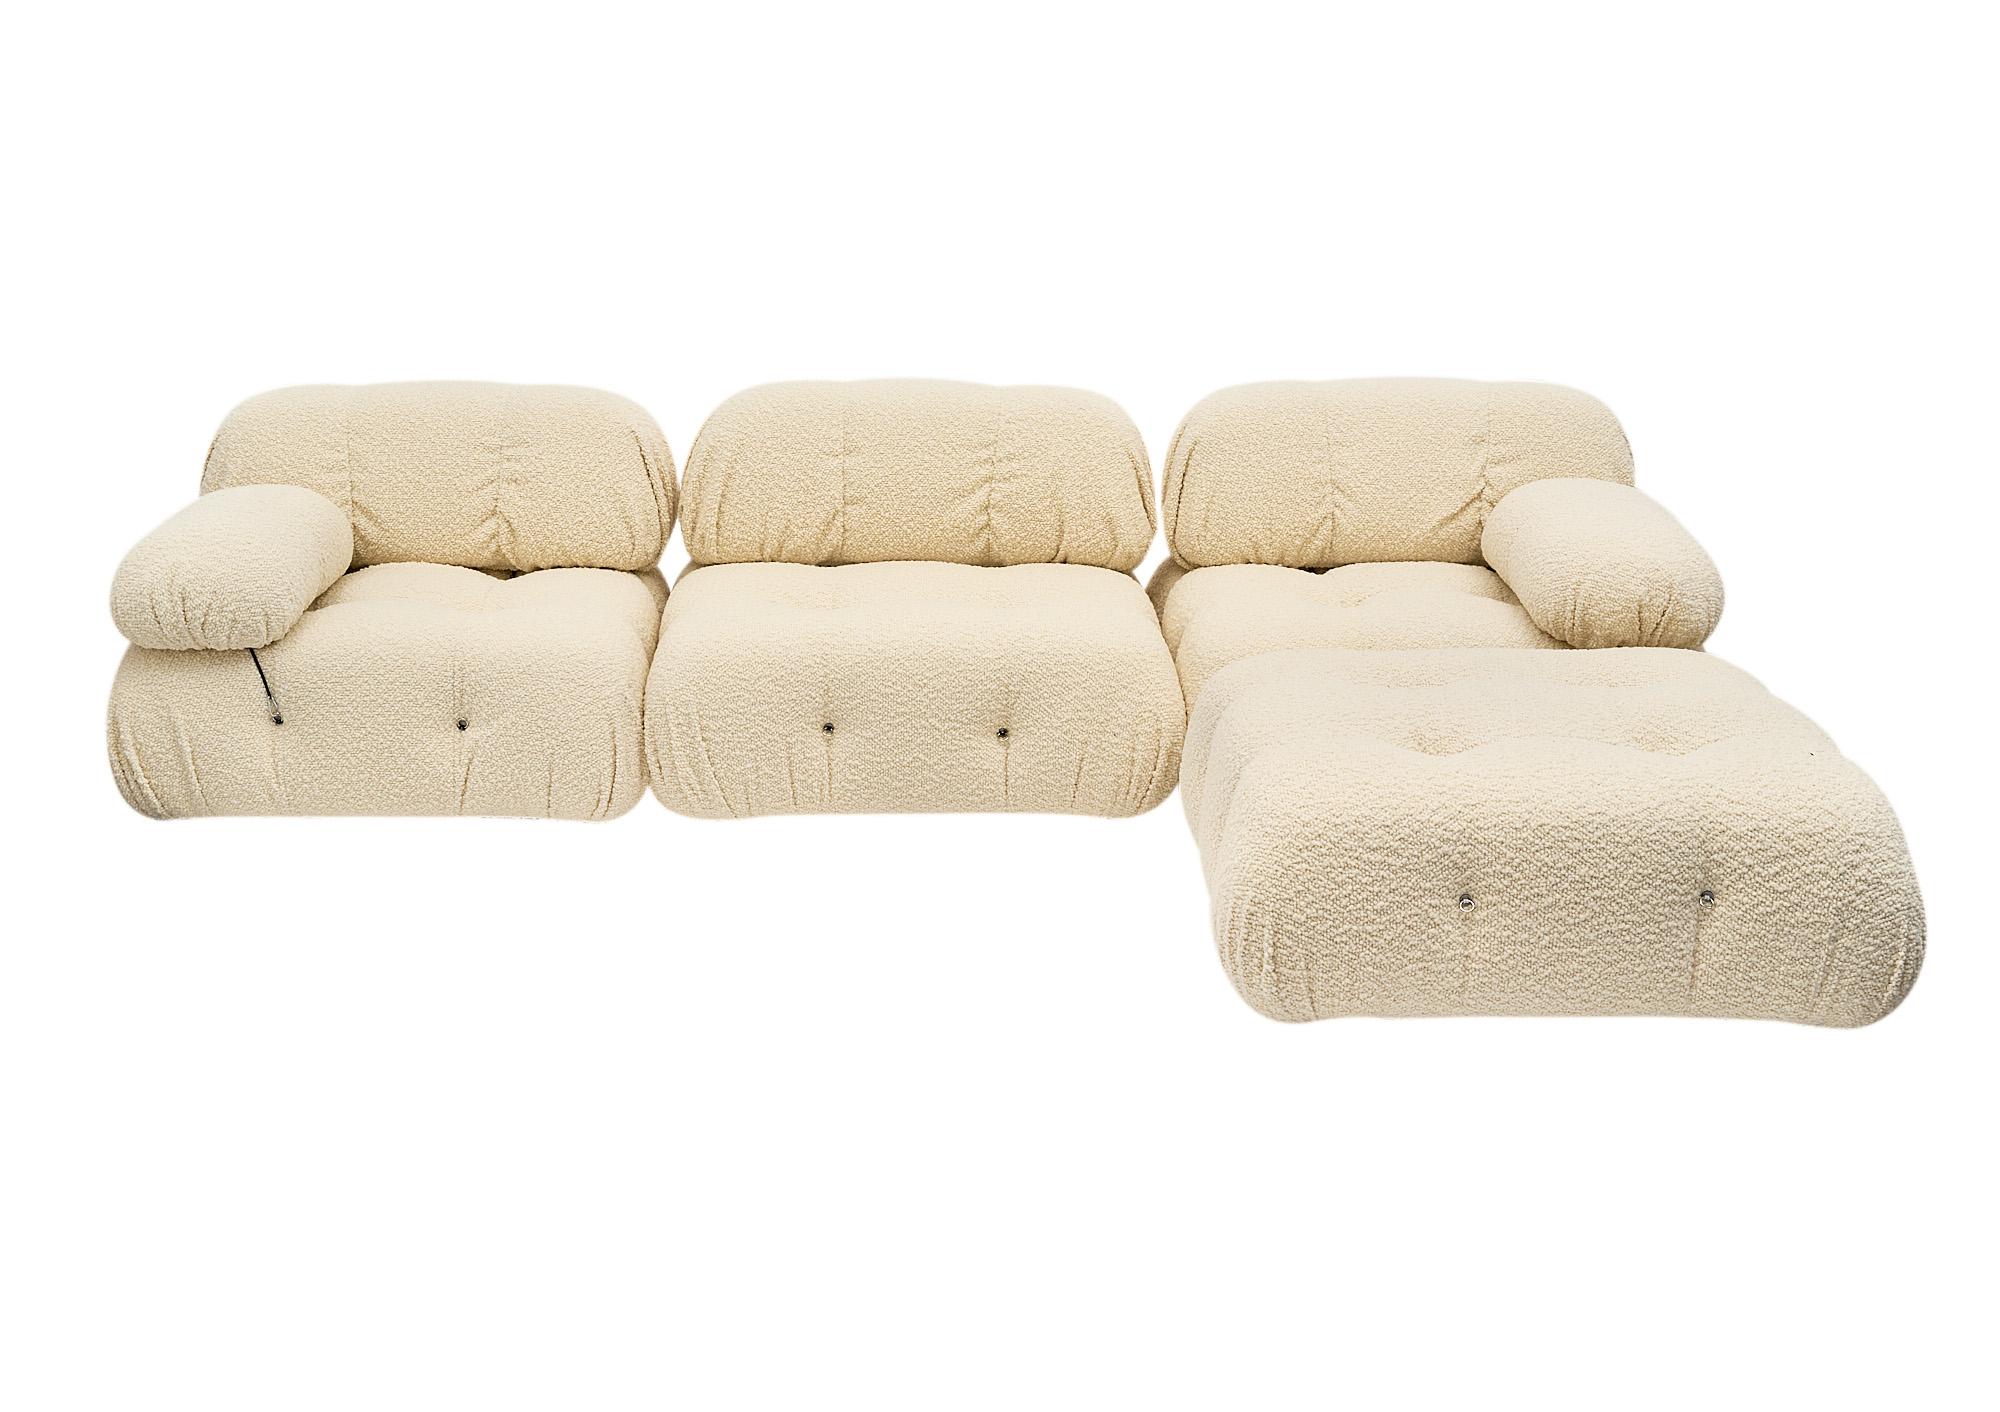 Custom sofa from Italy in the style of Mario Bellini’s Camaleonda modular sofa. Each piece alone is 38” in length by 39” in depth. The measurements listed are for the sofa as placed in the main photo.